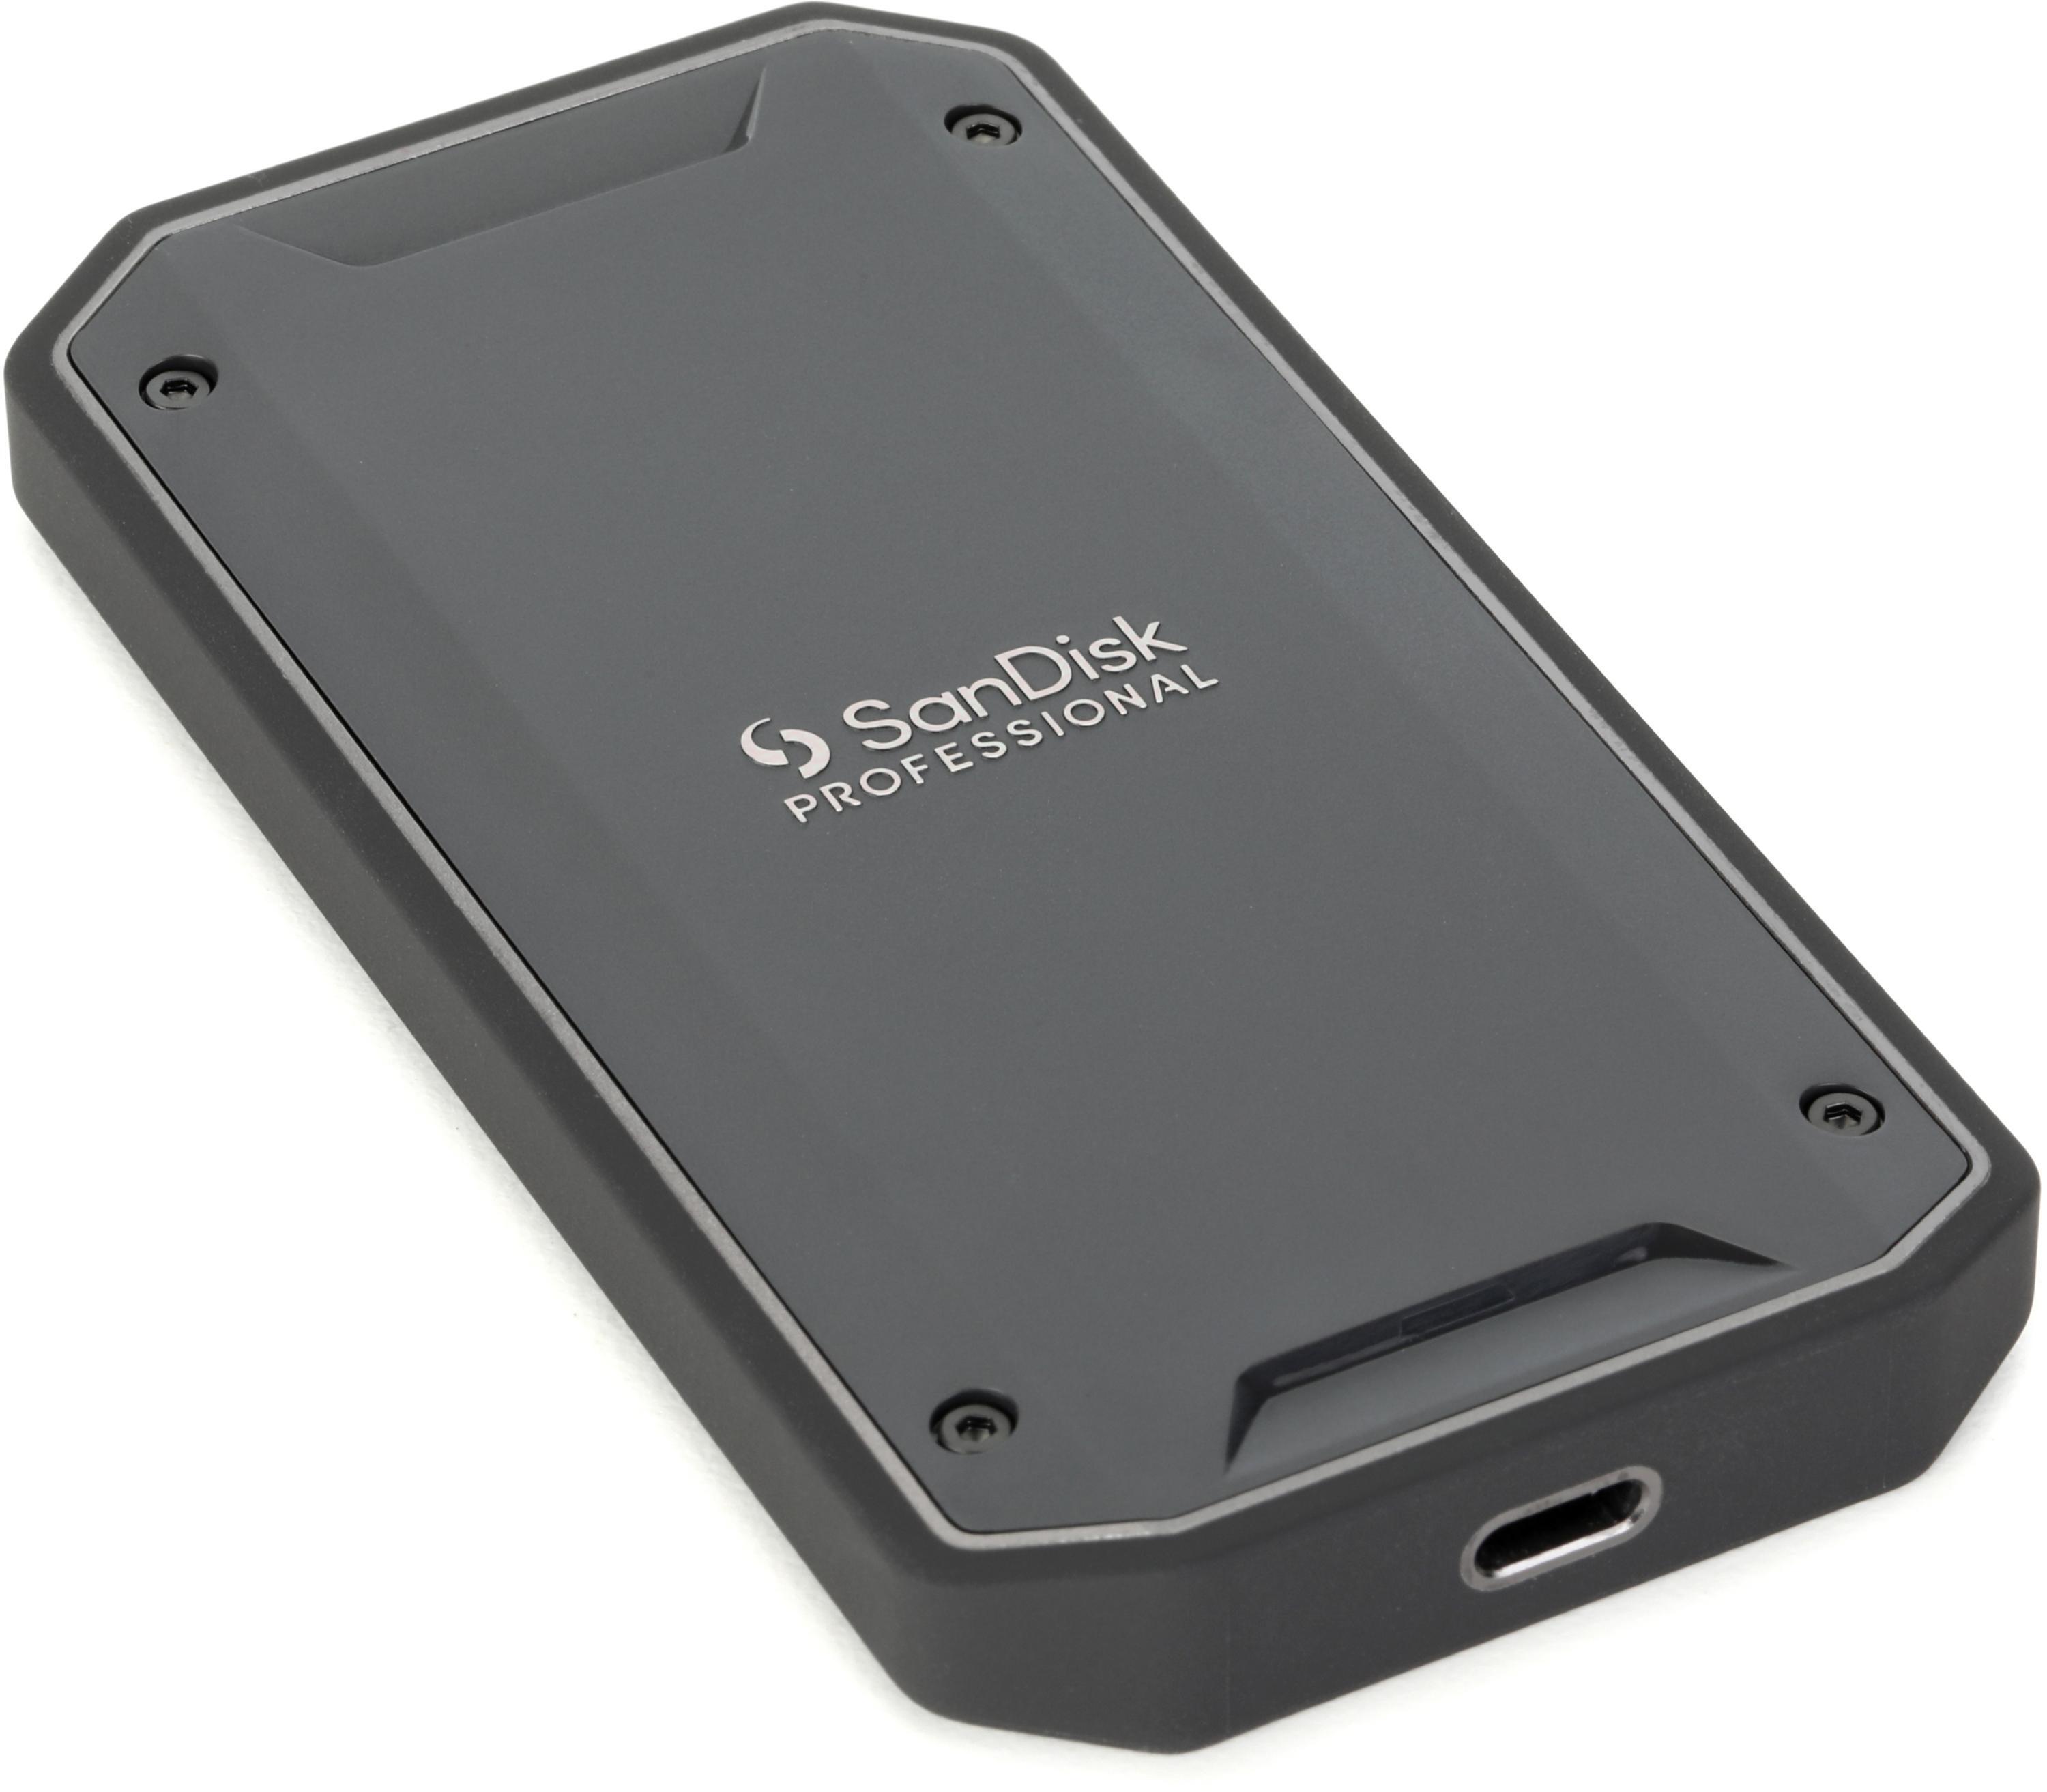 PRO-G40 SSD 4TB Portable Solid State Drive - Sweetwater